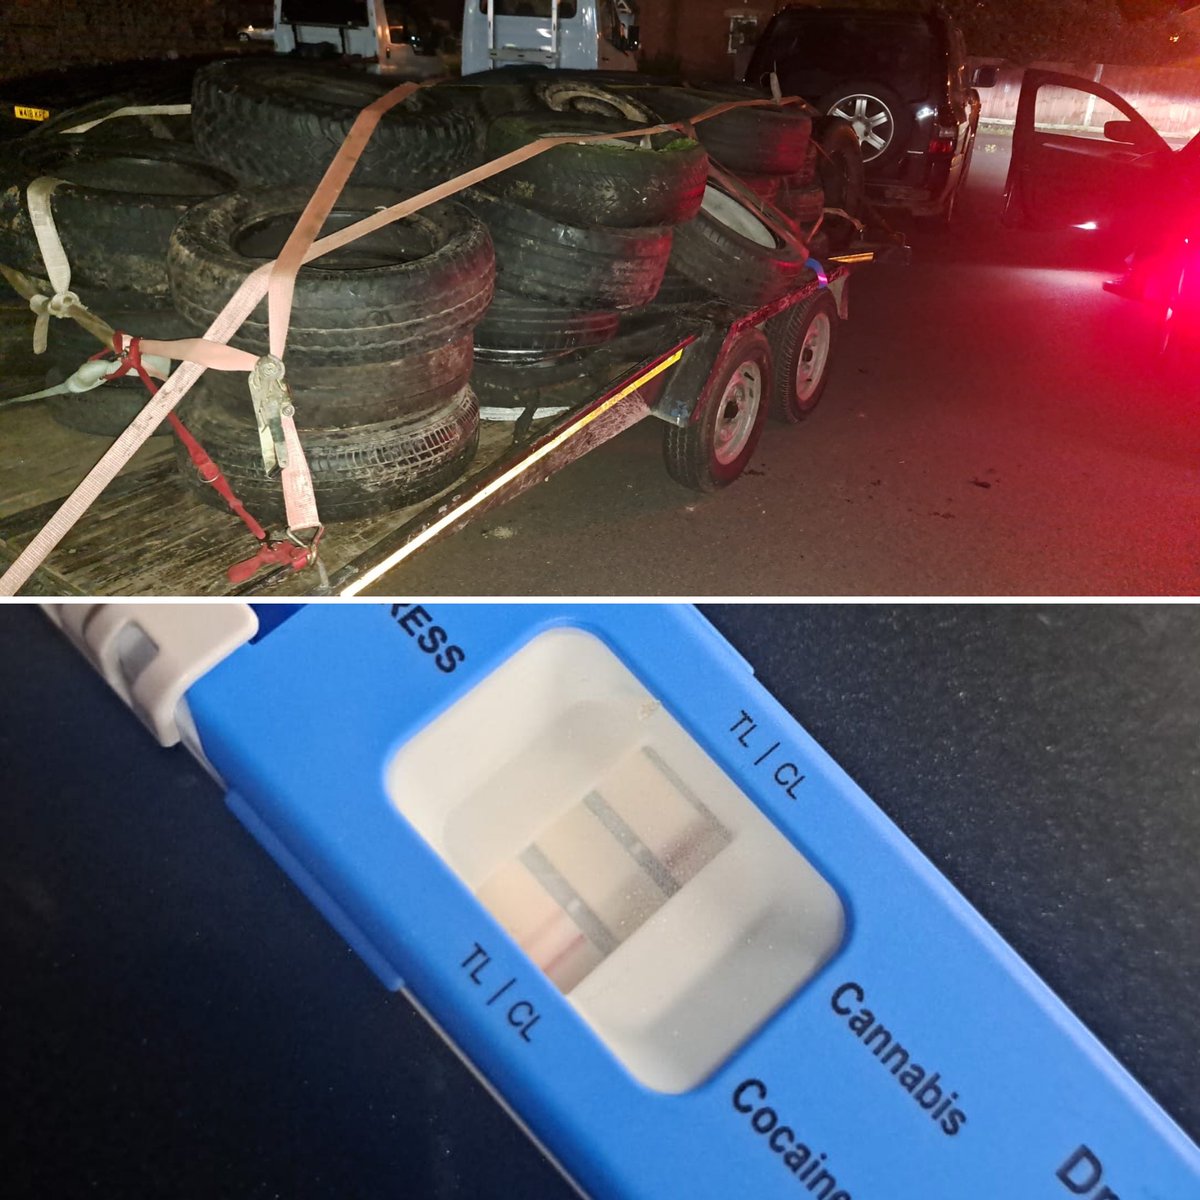 #RPU checked this combination out for load security, the driver was clearly ‘tyred’ and in need of something to stay awake, sadly for them they tested positive on the drug wipe for cocaine.
#Fatal5 #SharpScratch